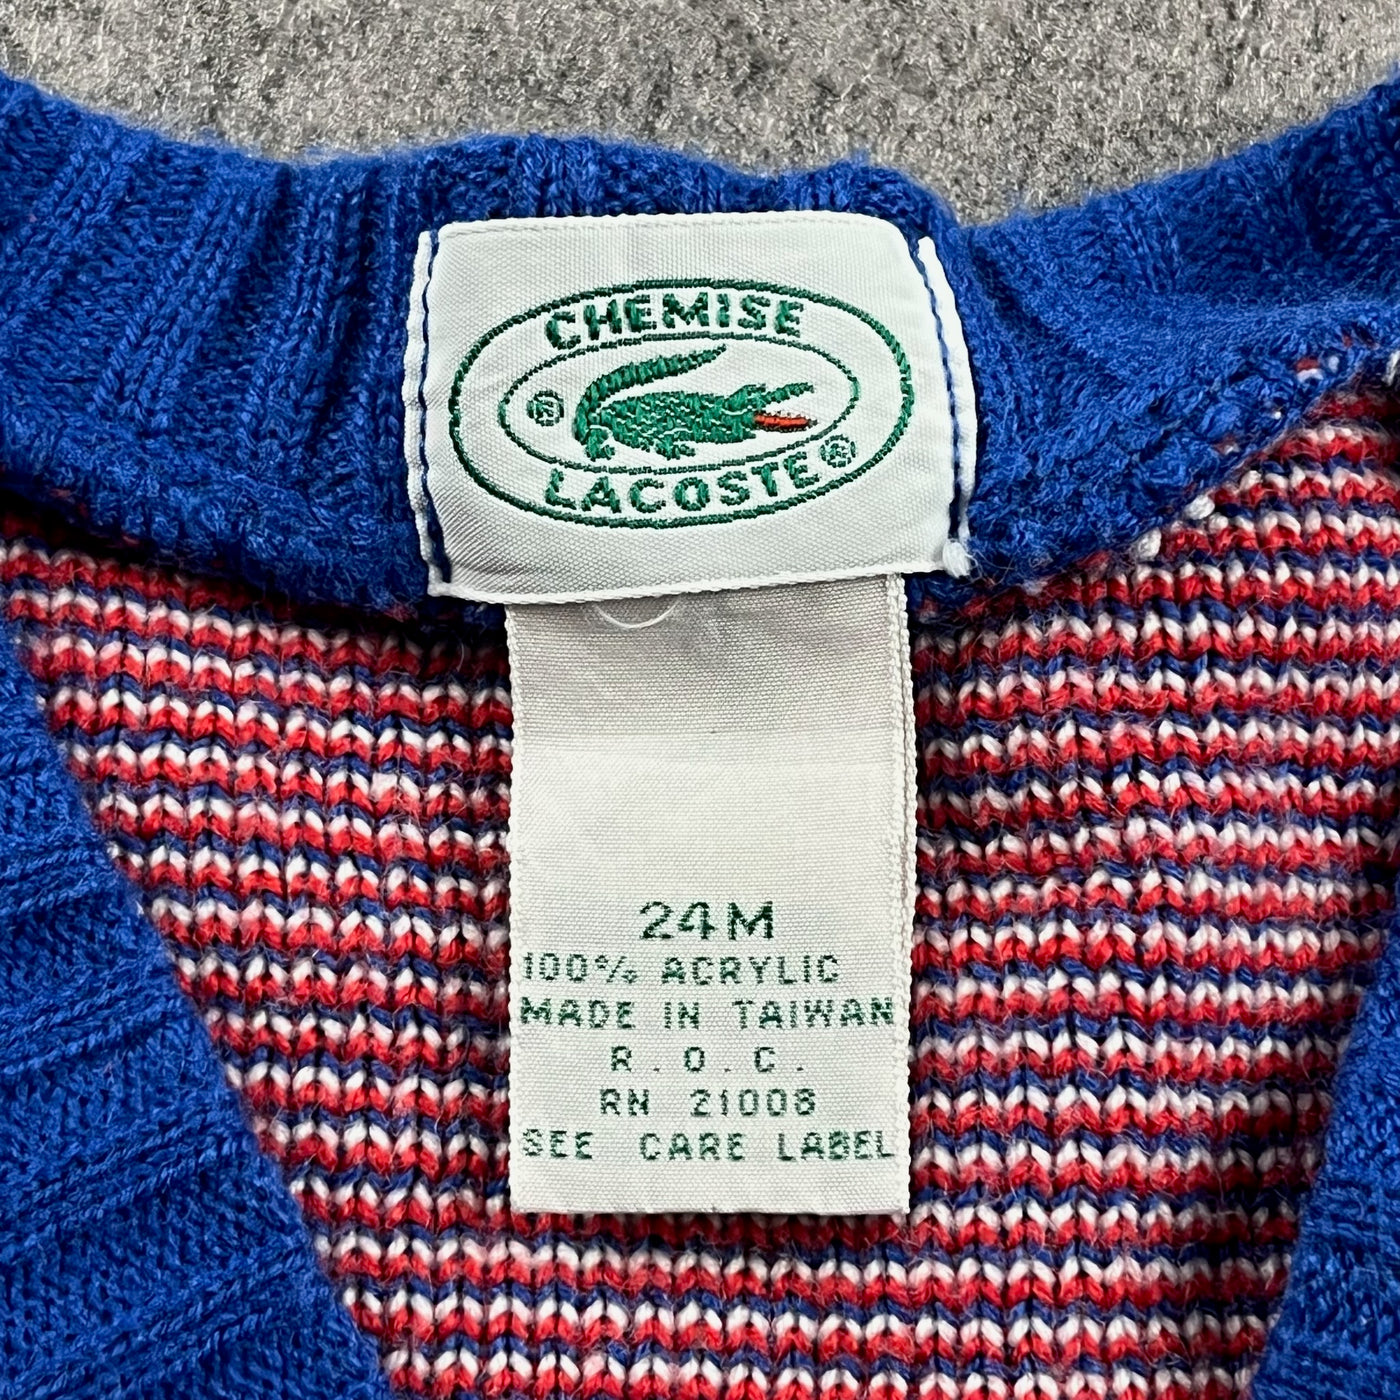 Vintage Lacoste Crewknit 18-24 Months